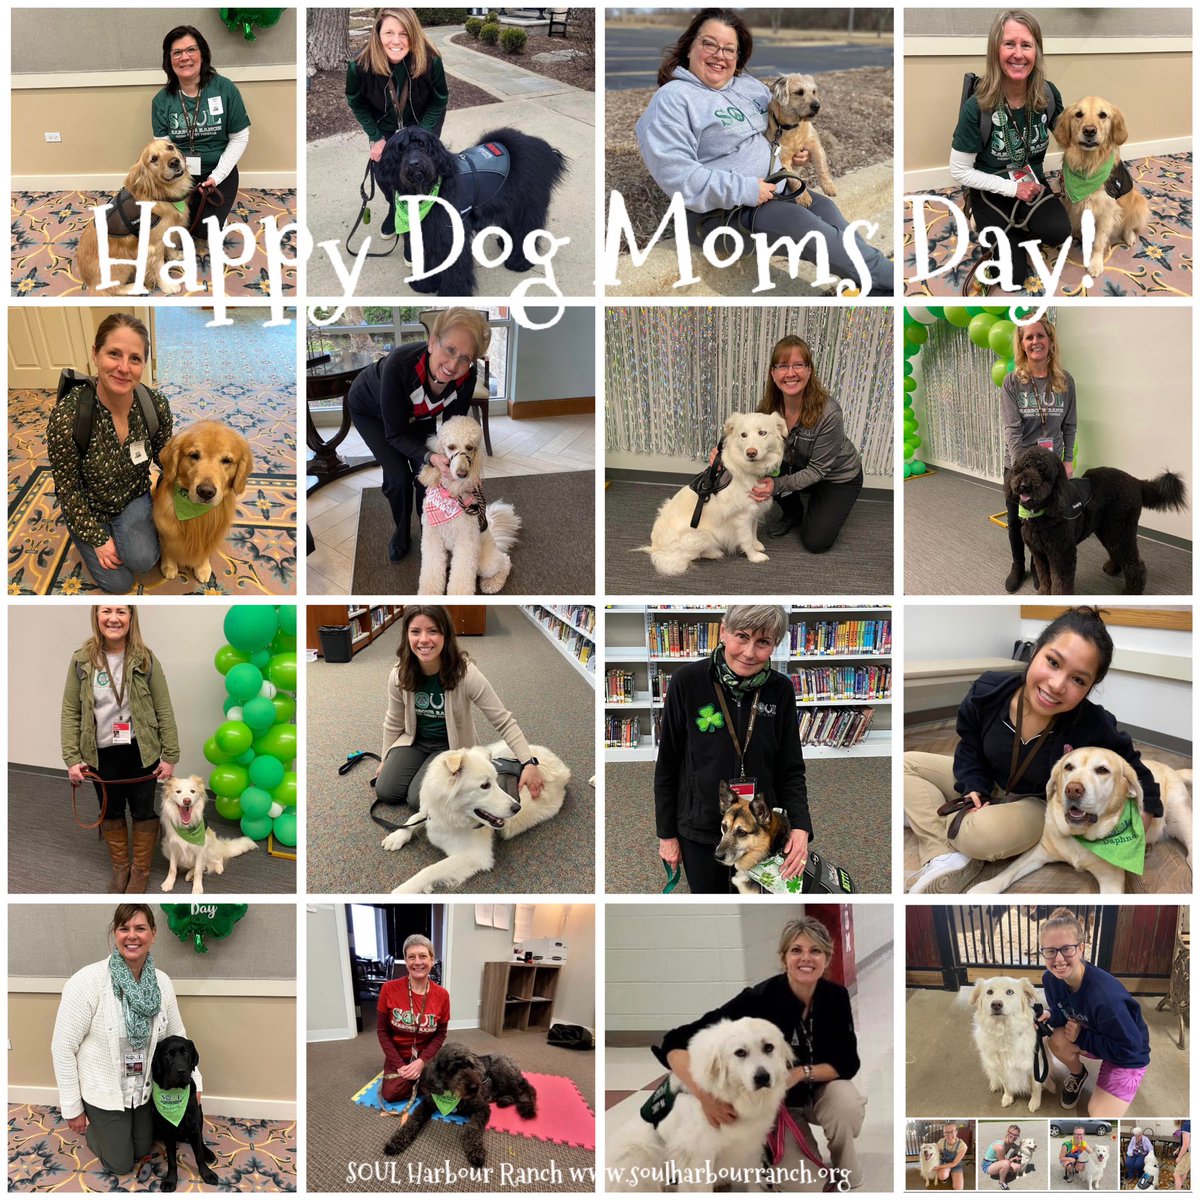 Happy Dog Moms Day to our therapy dog moms and dog moms everywhere! You are PAWSitively PAWsome! Please share your “babies” in the comments #NationalDogMomsDay #dogmomsday #dogmomsofinstagram 🐶🐾🐶🐾